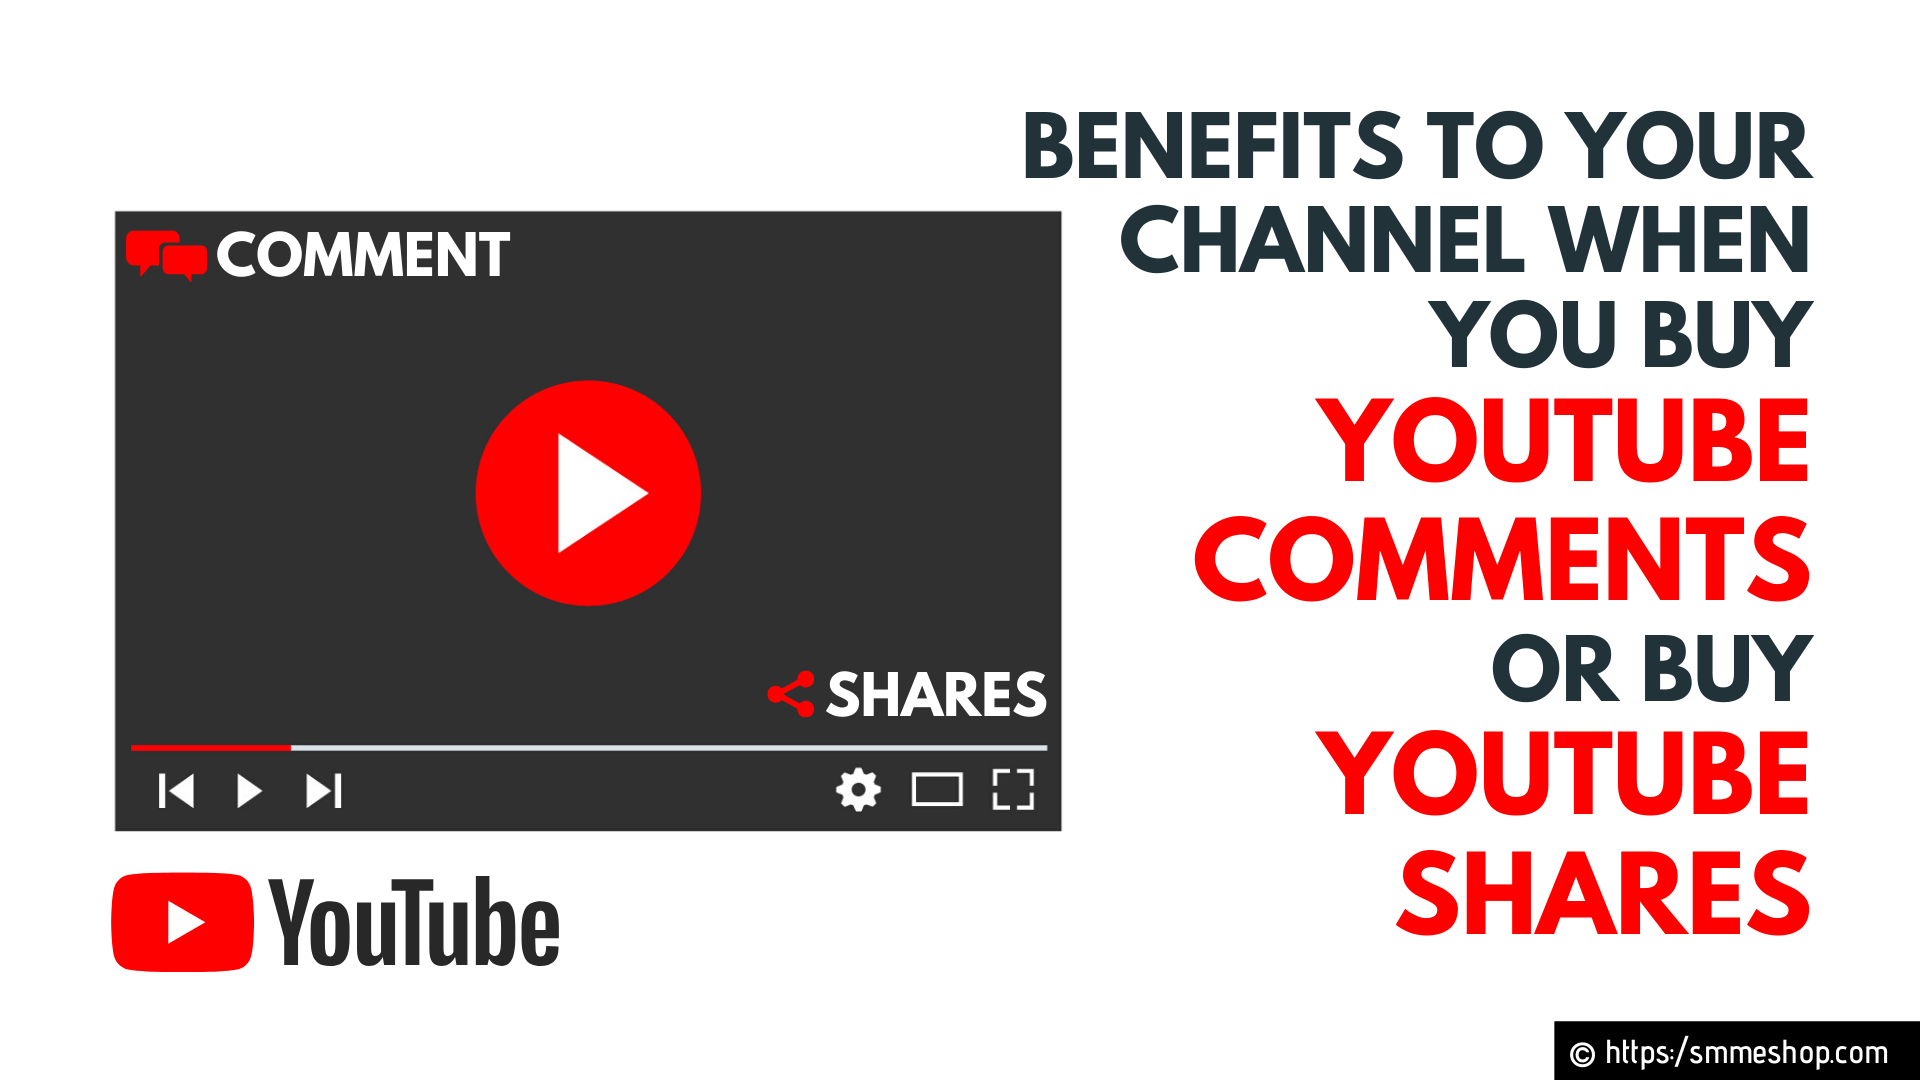 Benefits to your Channel when you Buy YouTube Comments or Buy YouTube Shares